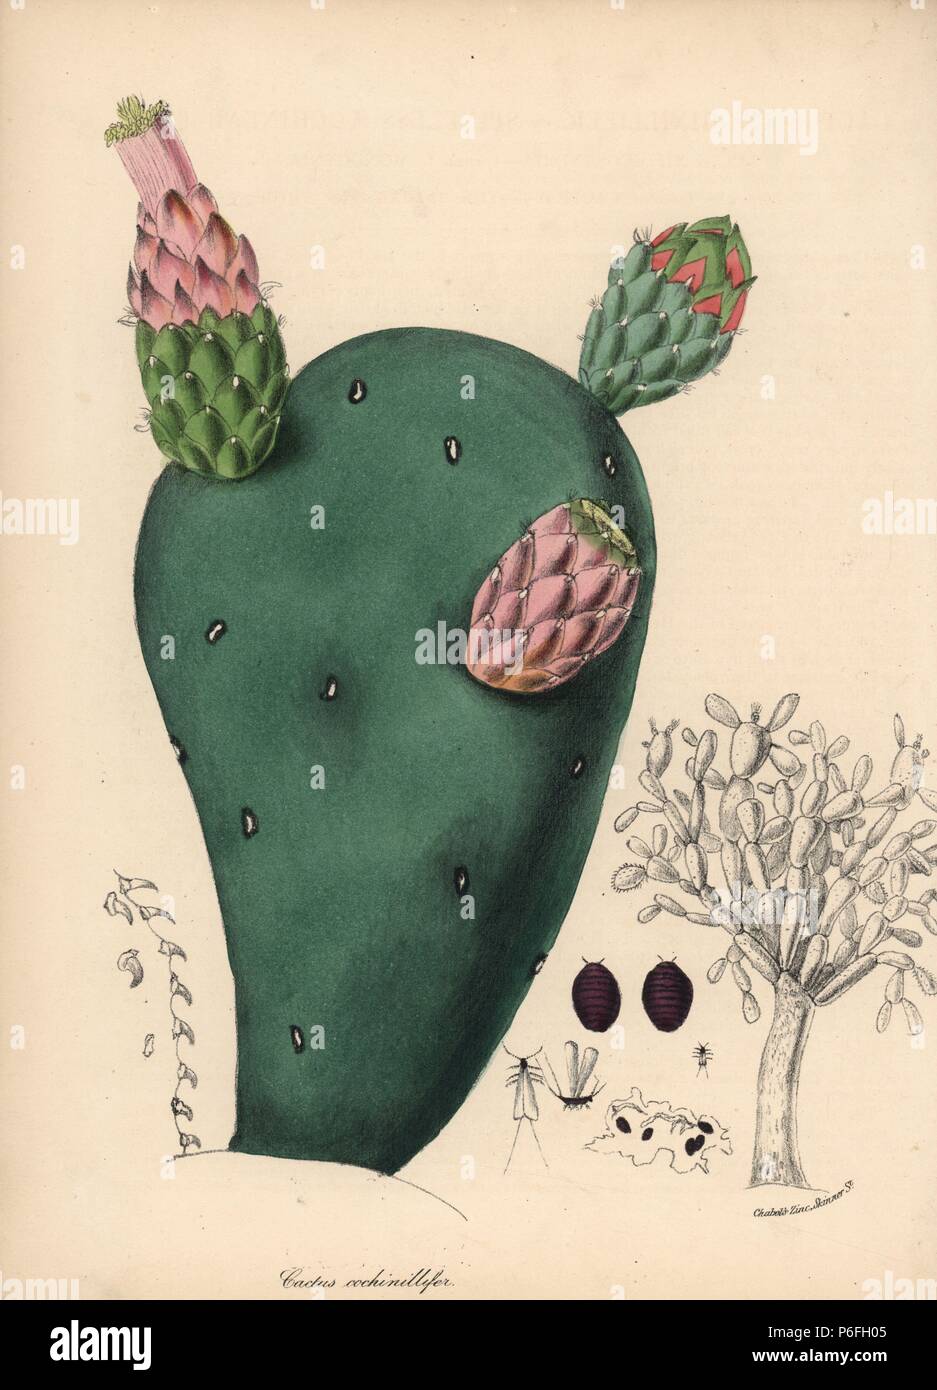 Opuntia, nopales or paddle cactus, Nopalea cochenillifera (Spineless cochineal fig, Cactus cochinillifer) with cochineal beetles. Handcoloured zincograph by C. Chabot drawn by Miss M. A. Burnett from her 'Plantae Utiliores: or Illustrations of Useful Plants,' Whittaker, London, 1842. Miss Burnett drew the botanical illustrations, but the text was chiefly by her late brother, British botanist Gilbert Thomas Burnett (1800-1835). Stock Photo